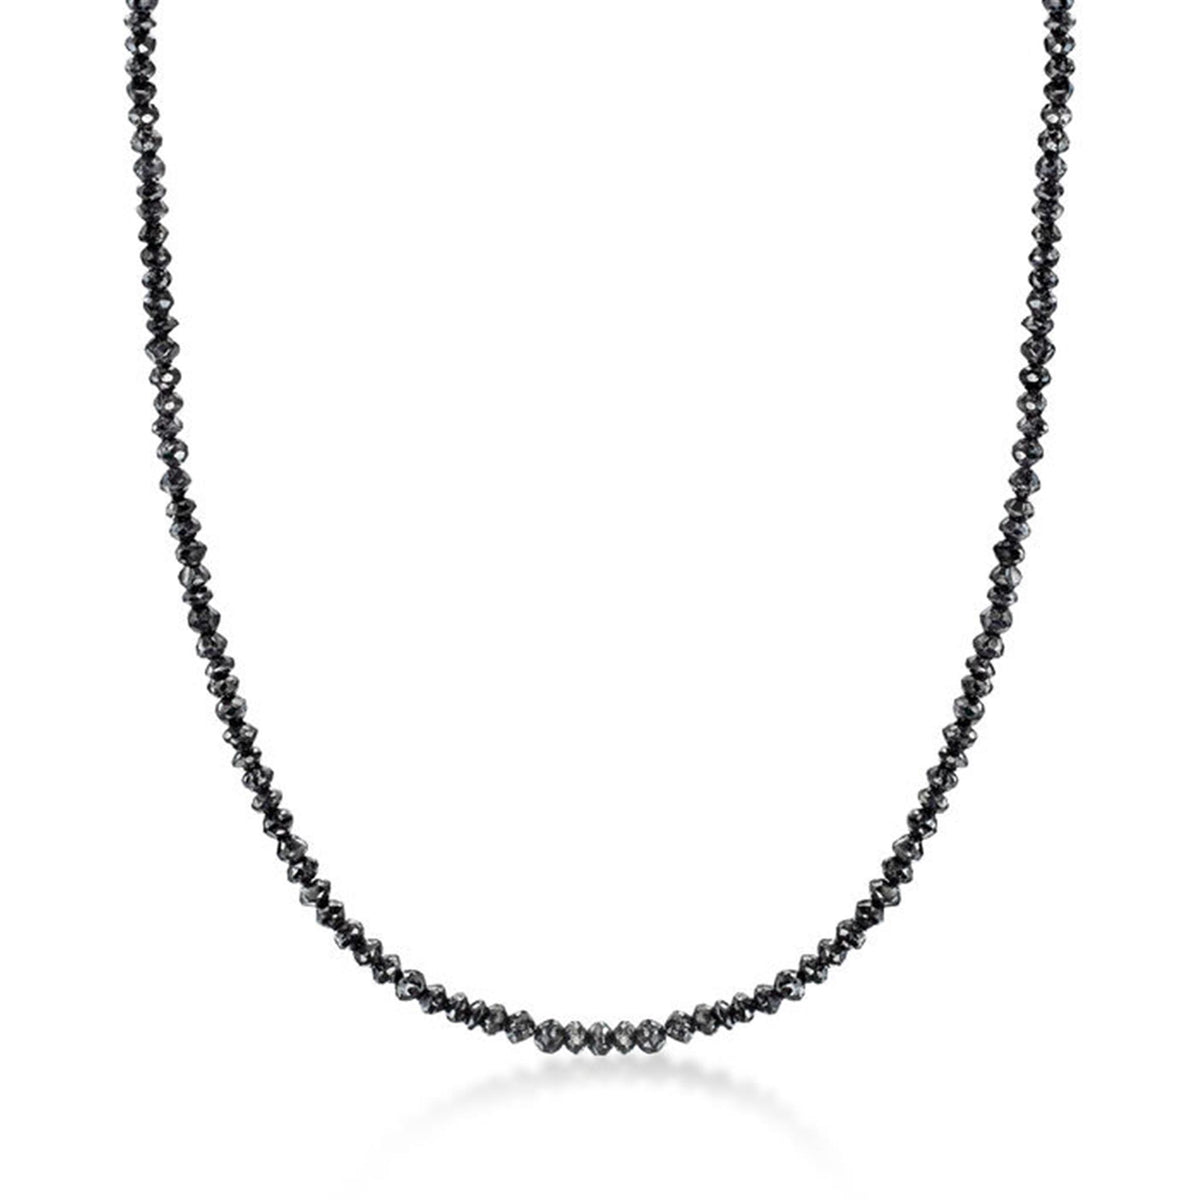 18" Faceted 2mm Black Diamond Bead Necklace - 21.75cttw